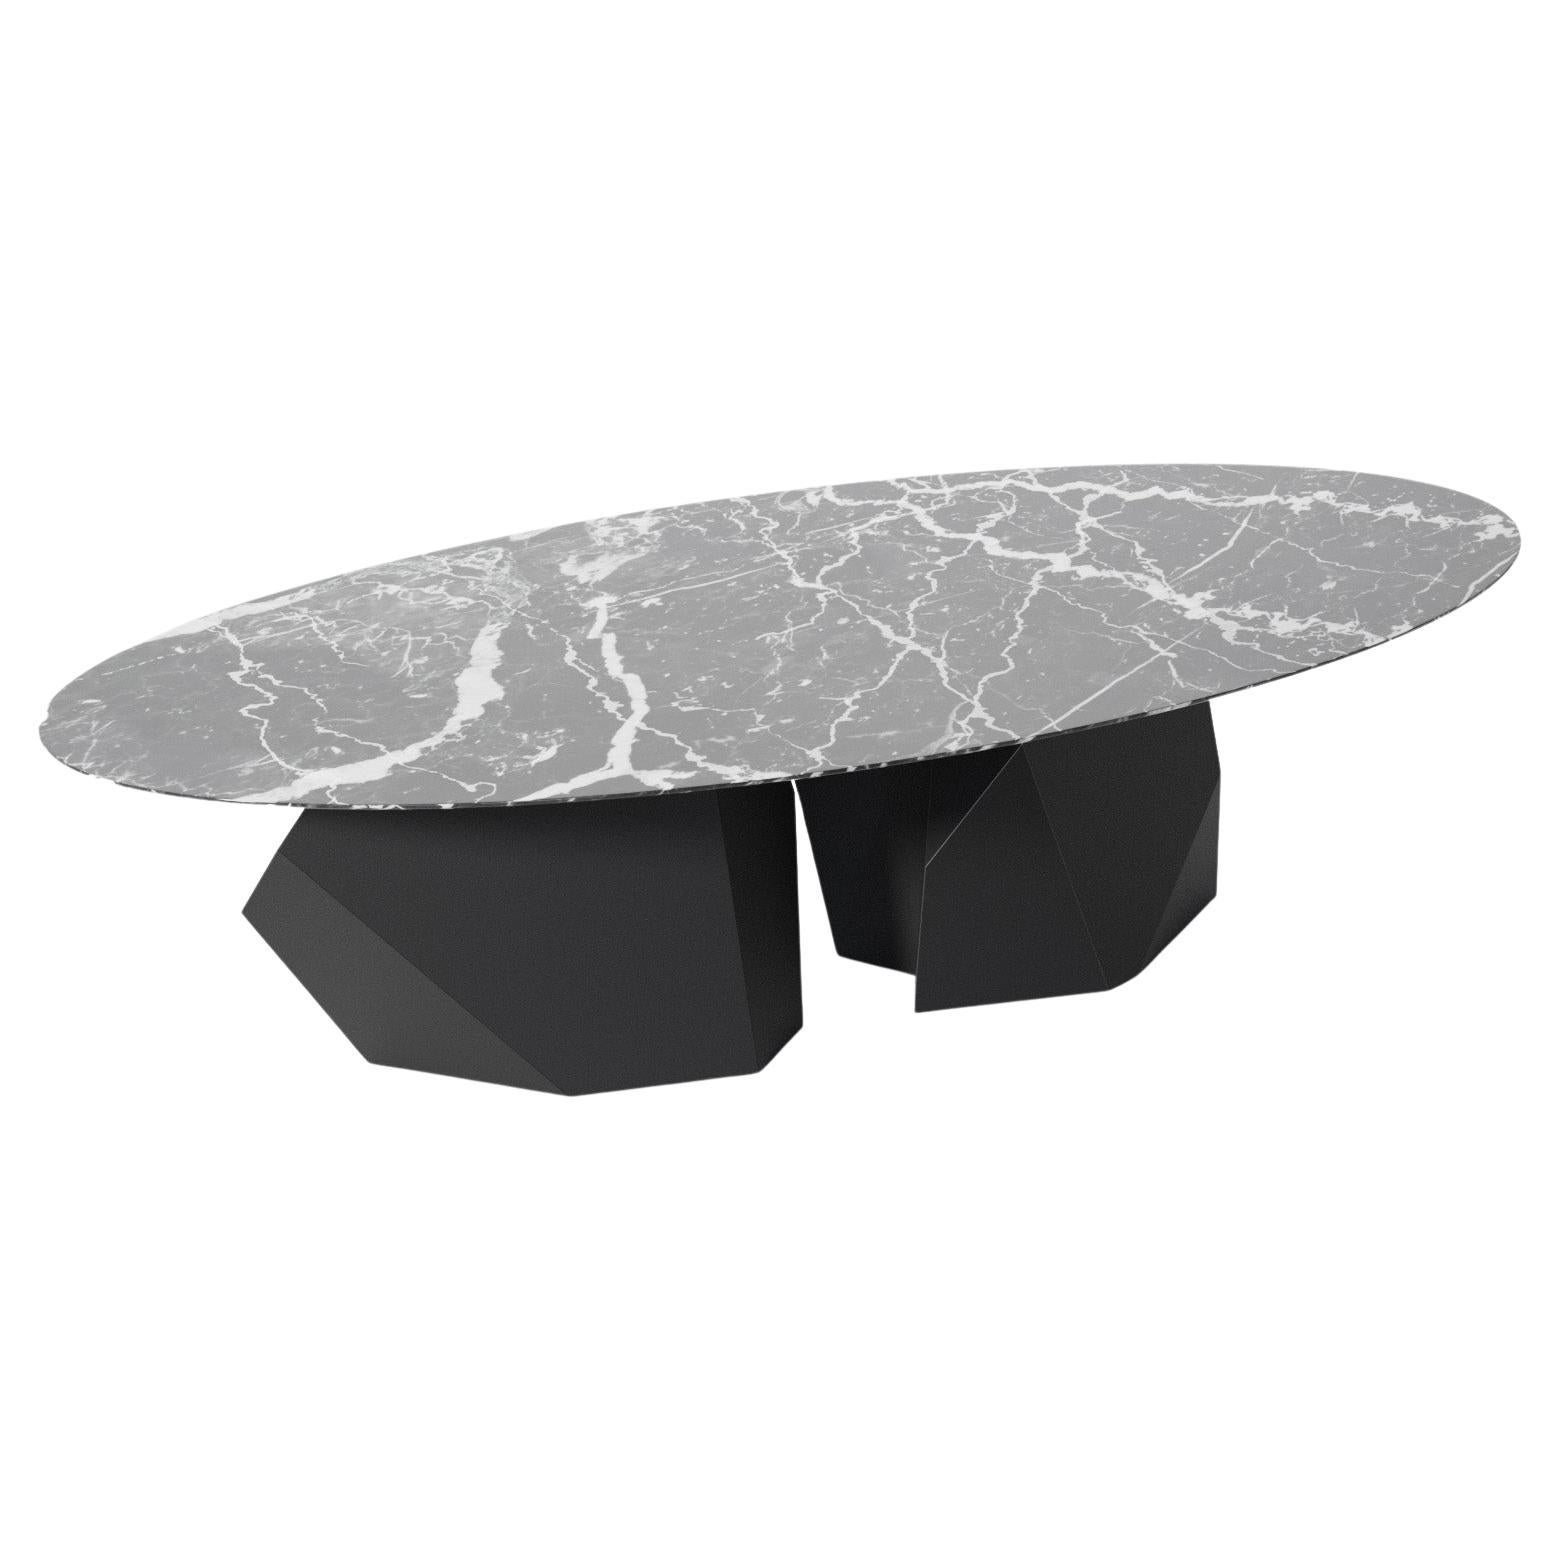 21st Century Modern Coffee Table in Marble & Matte Black Finish For Sale